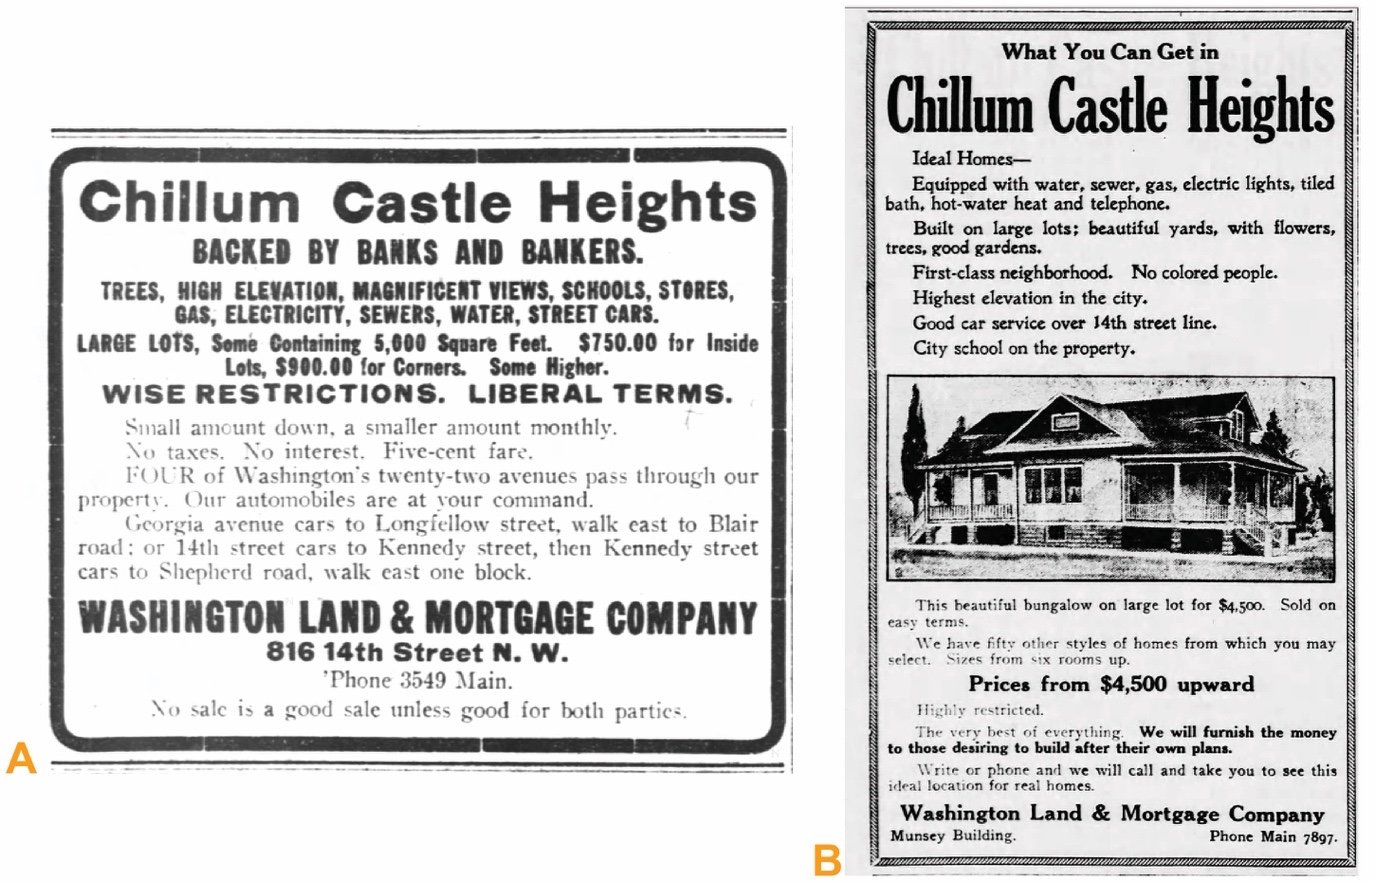  Early 20th century real estate ads for Chillum Castle Heights, located in portions of the cultural landscape, used both coded language like “wise restrictions,” and more explicit language like, “First Class Neighborhood. No Colored People,” to indic